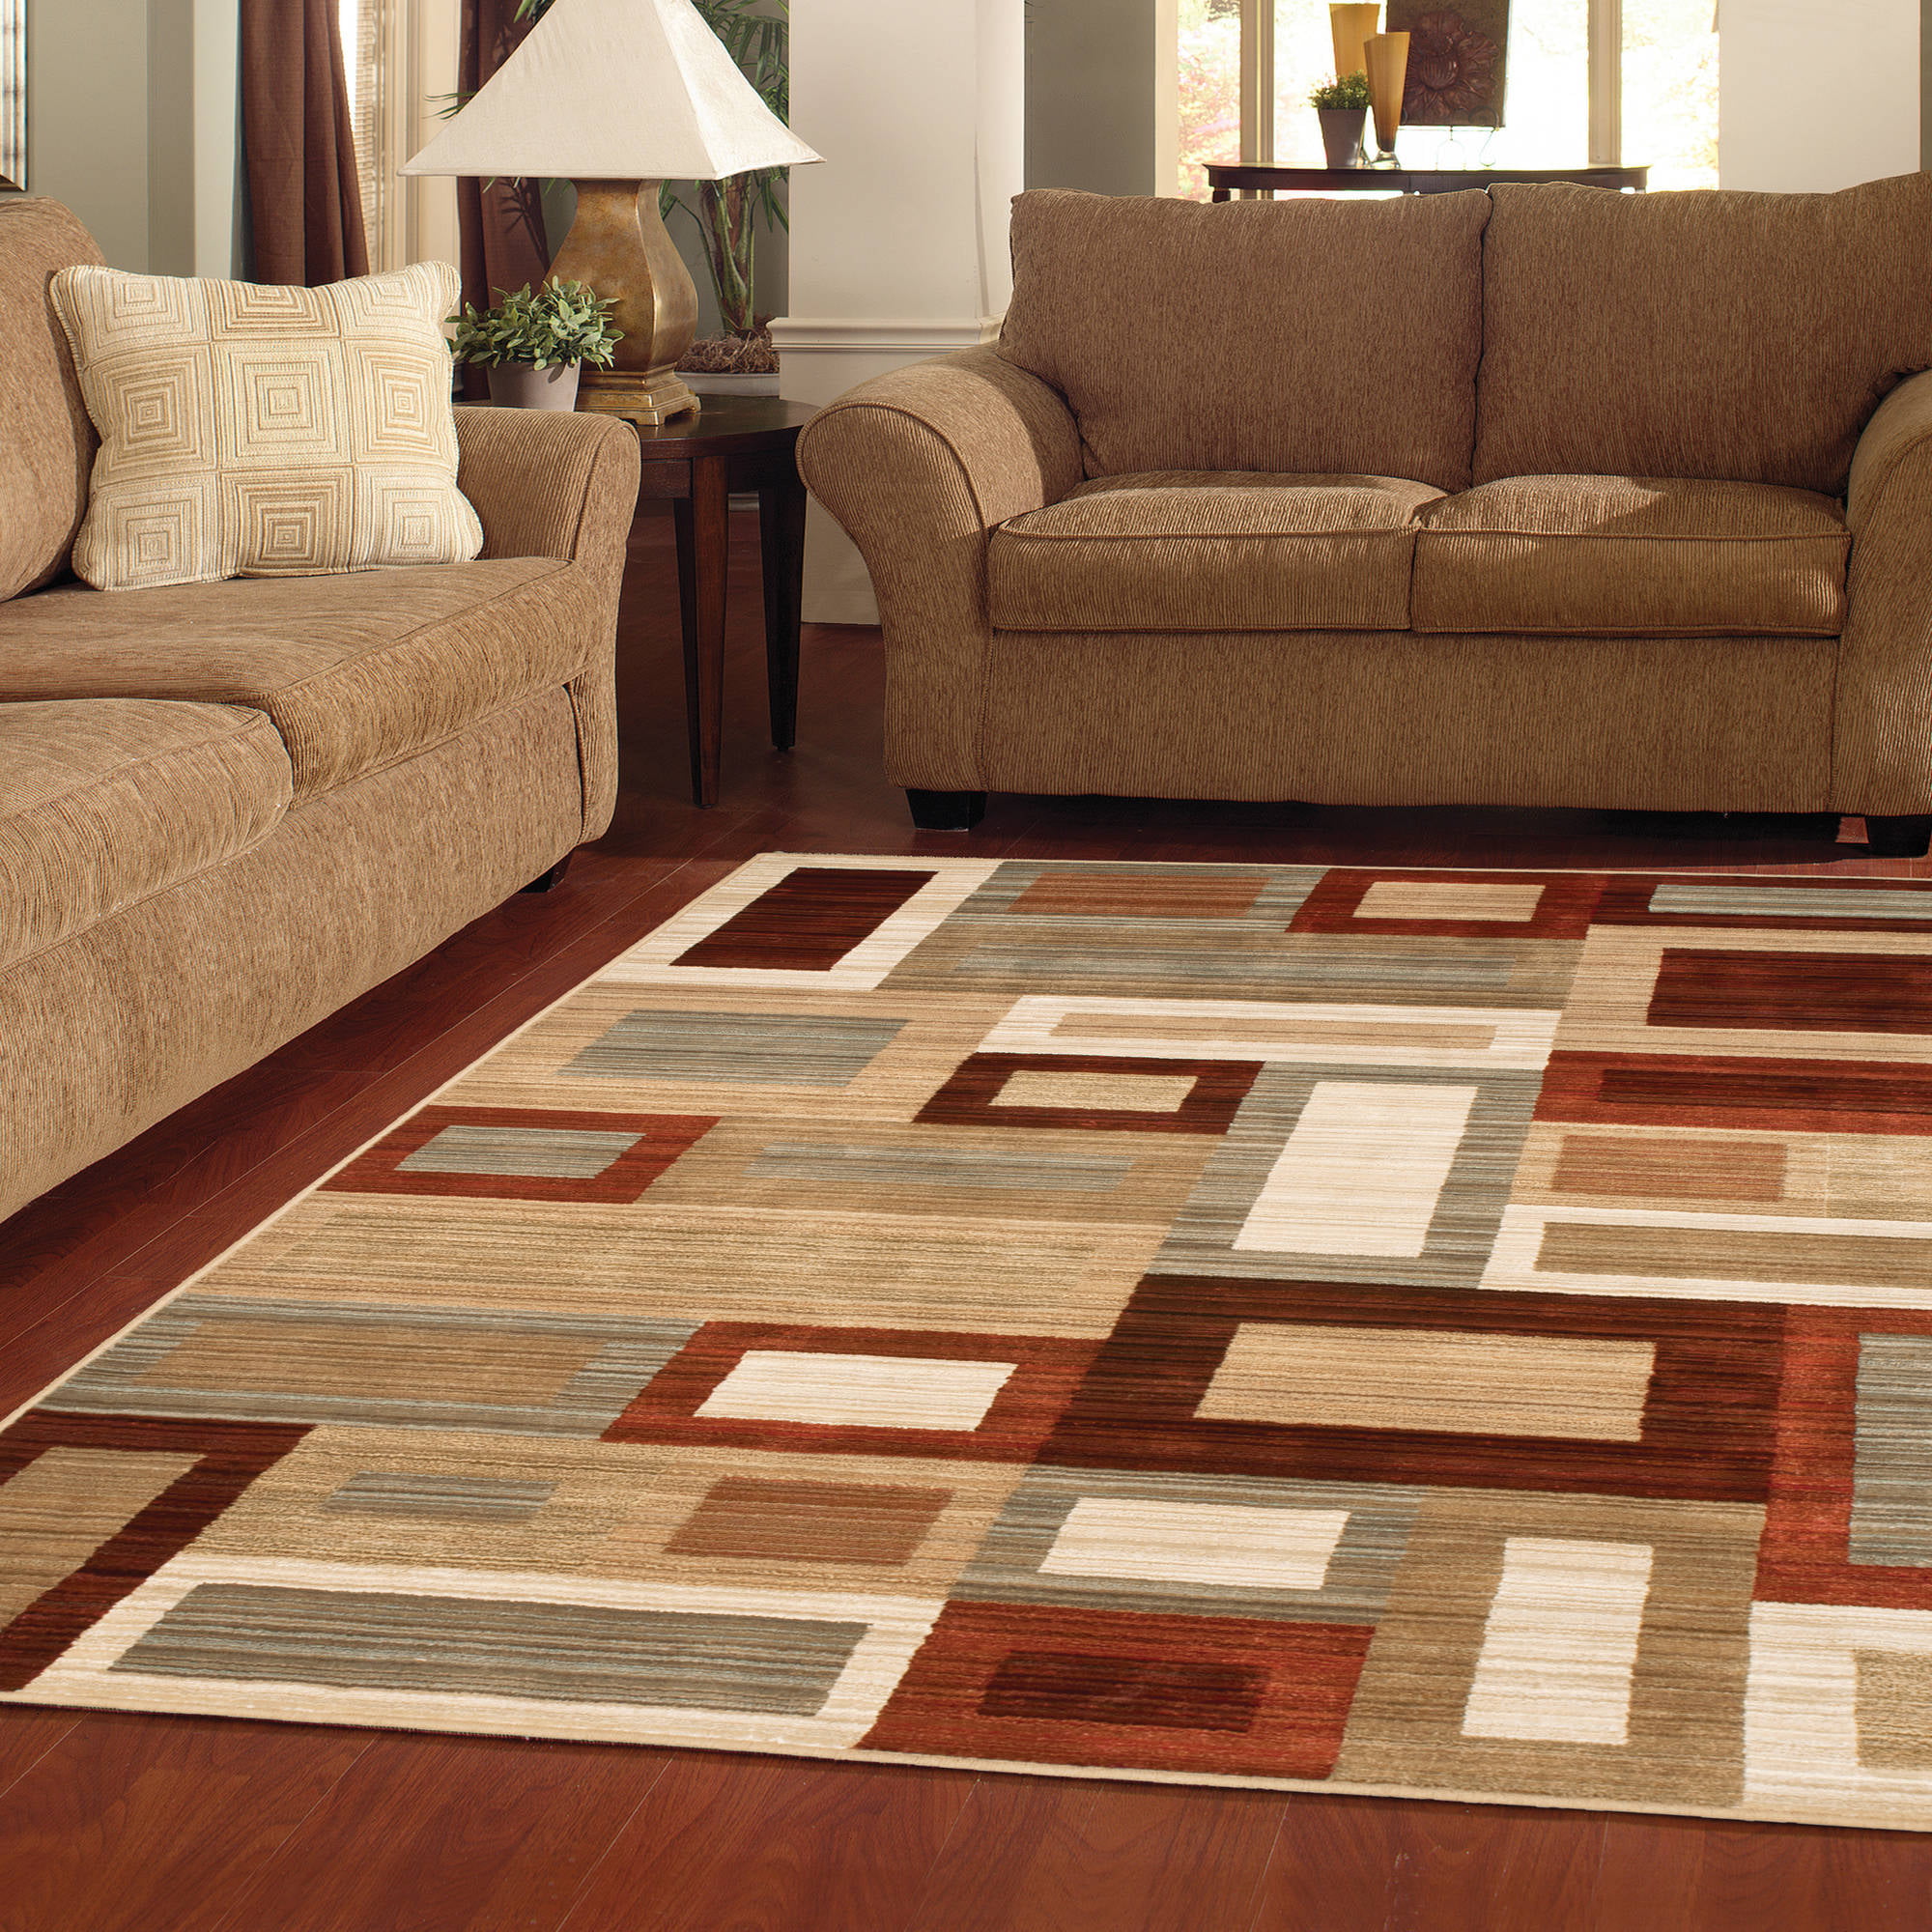 Better Homes And Gardens Franklin Squares Area Rug Or Runner